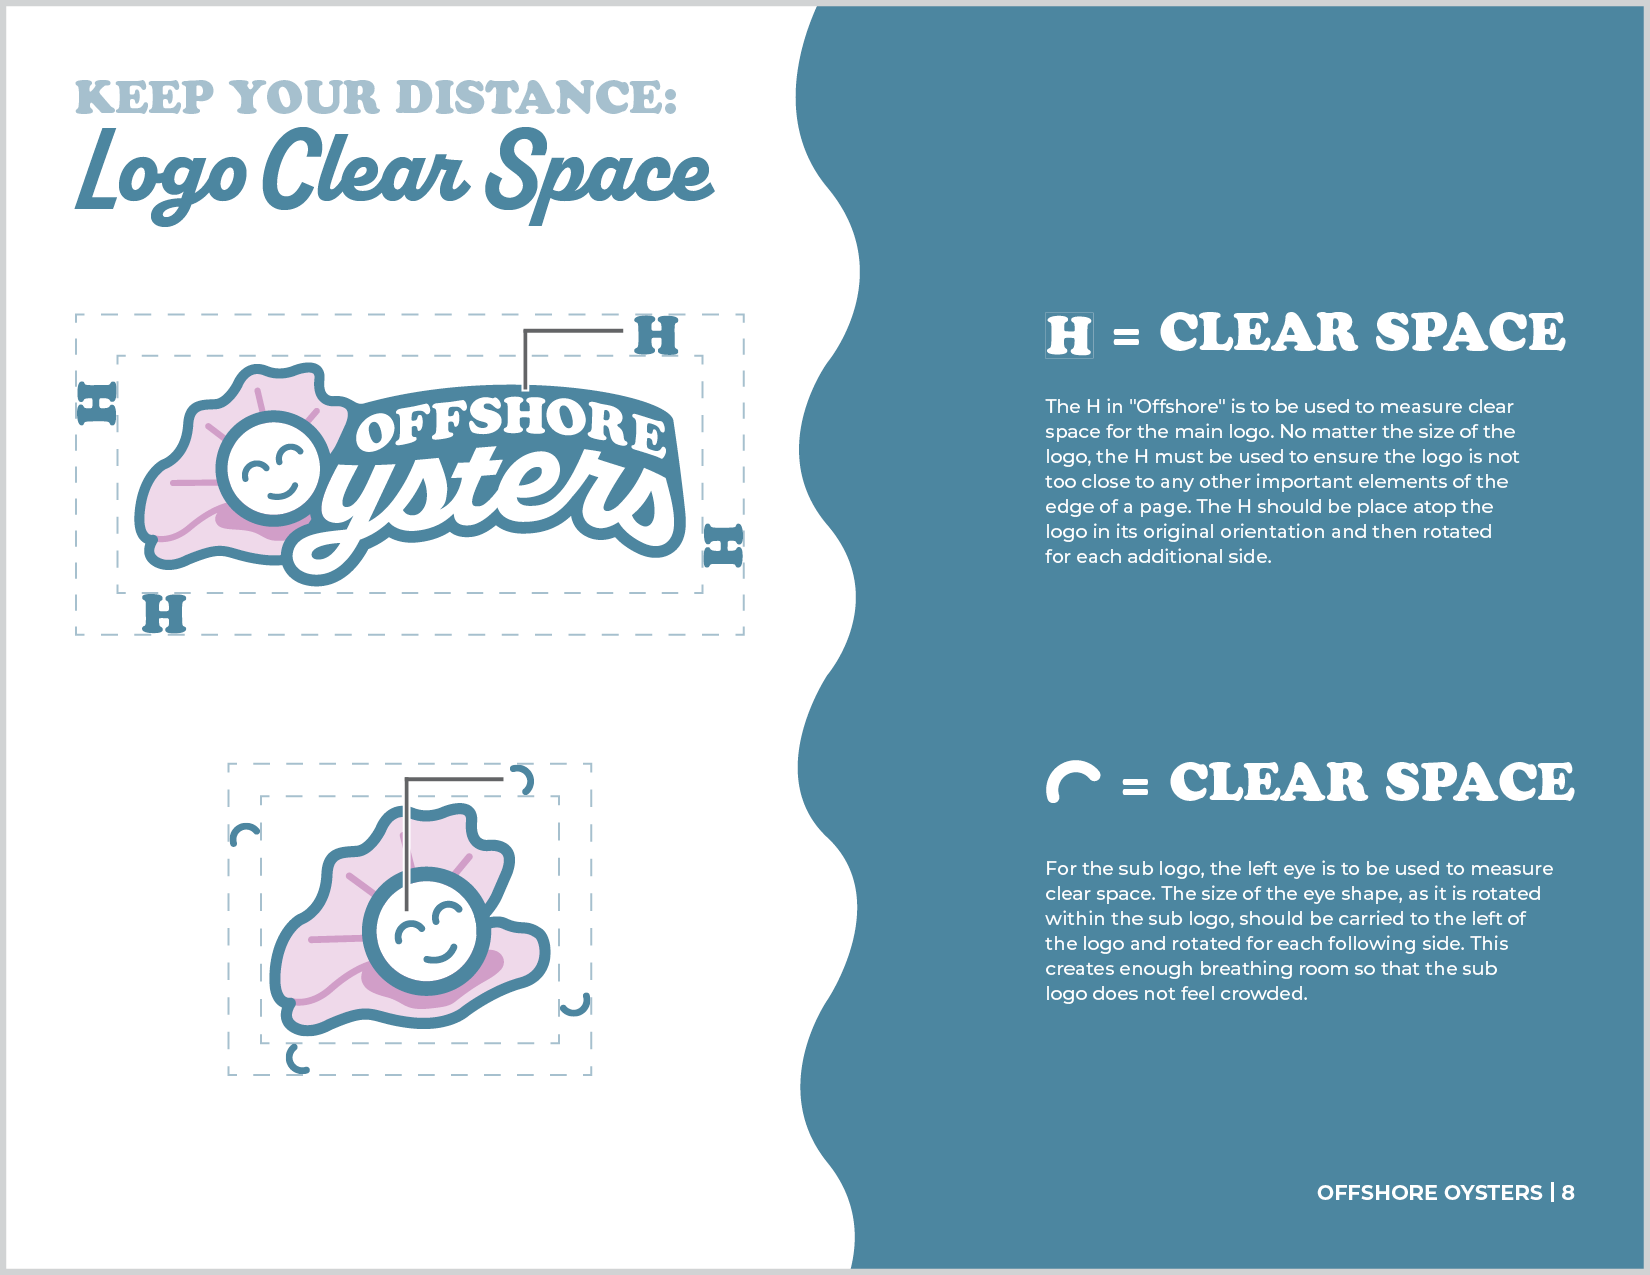 Offshore Oysters brand guideline logo clear space.